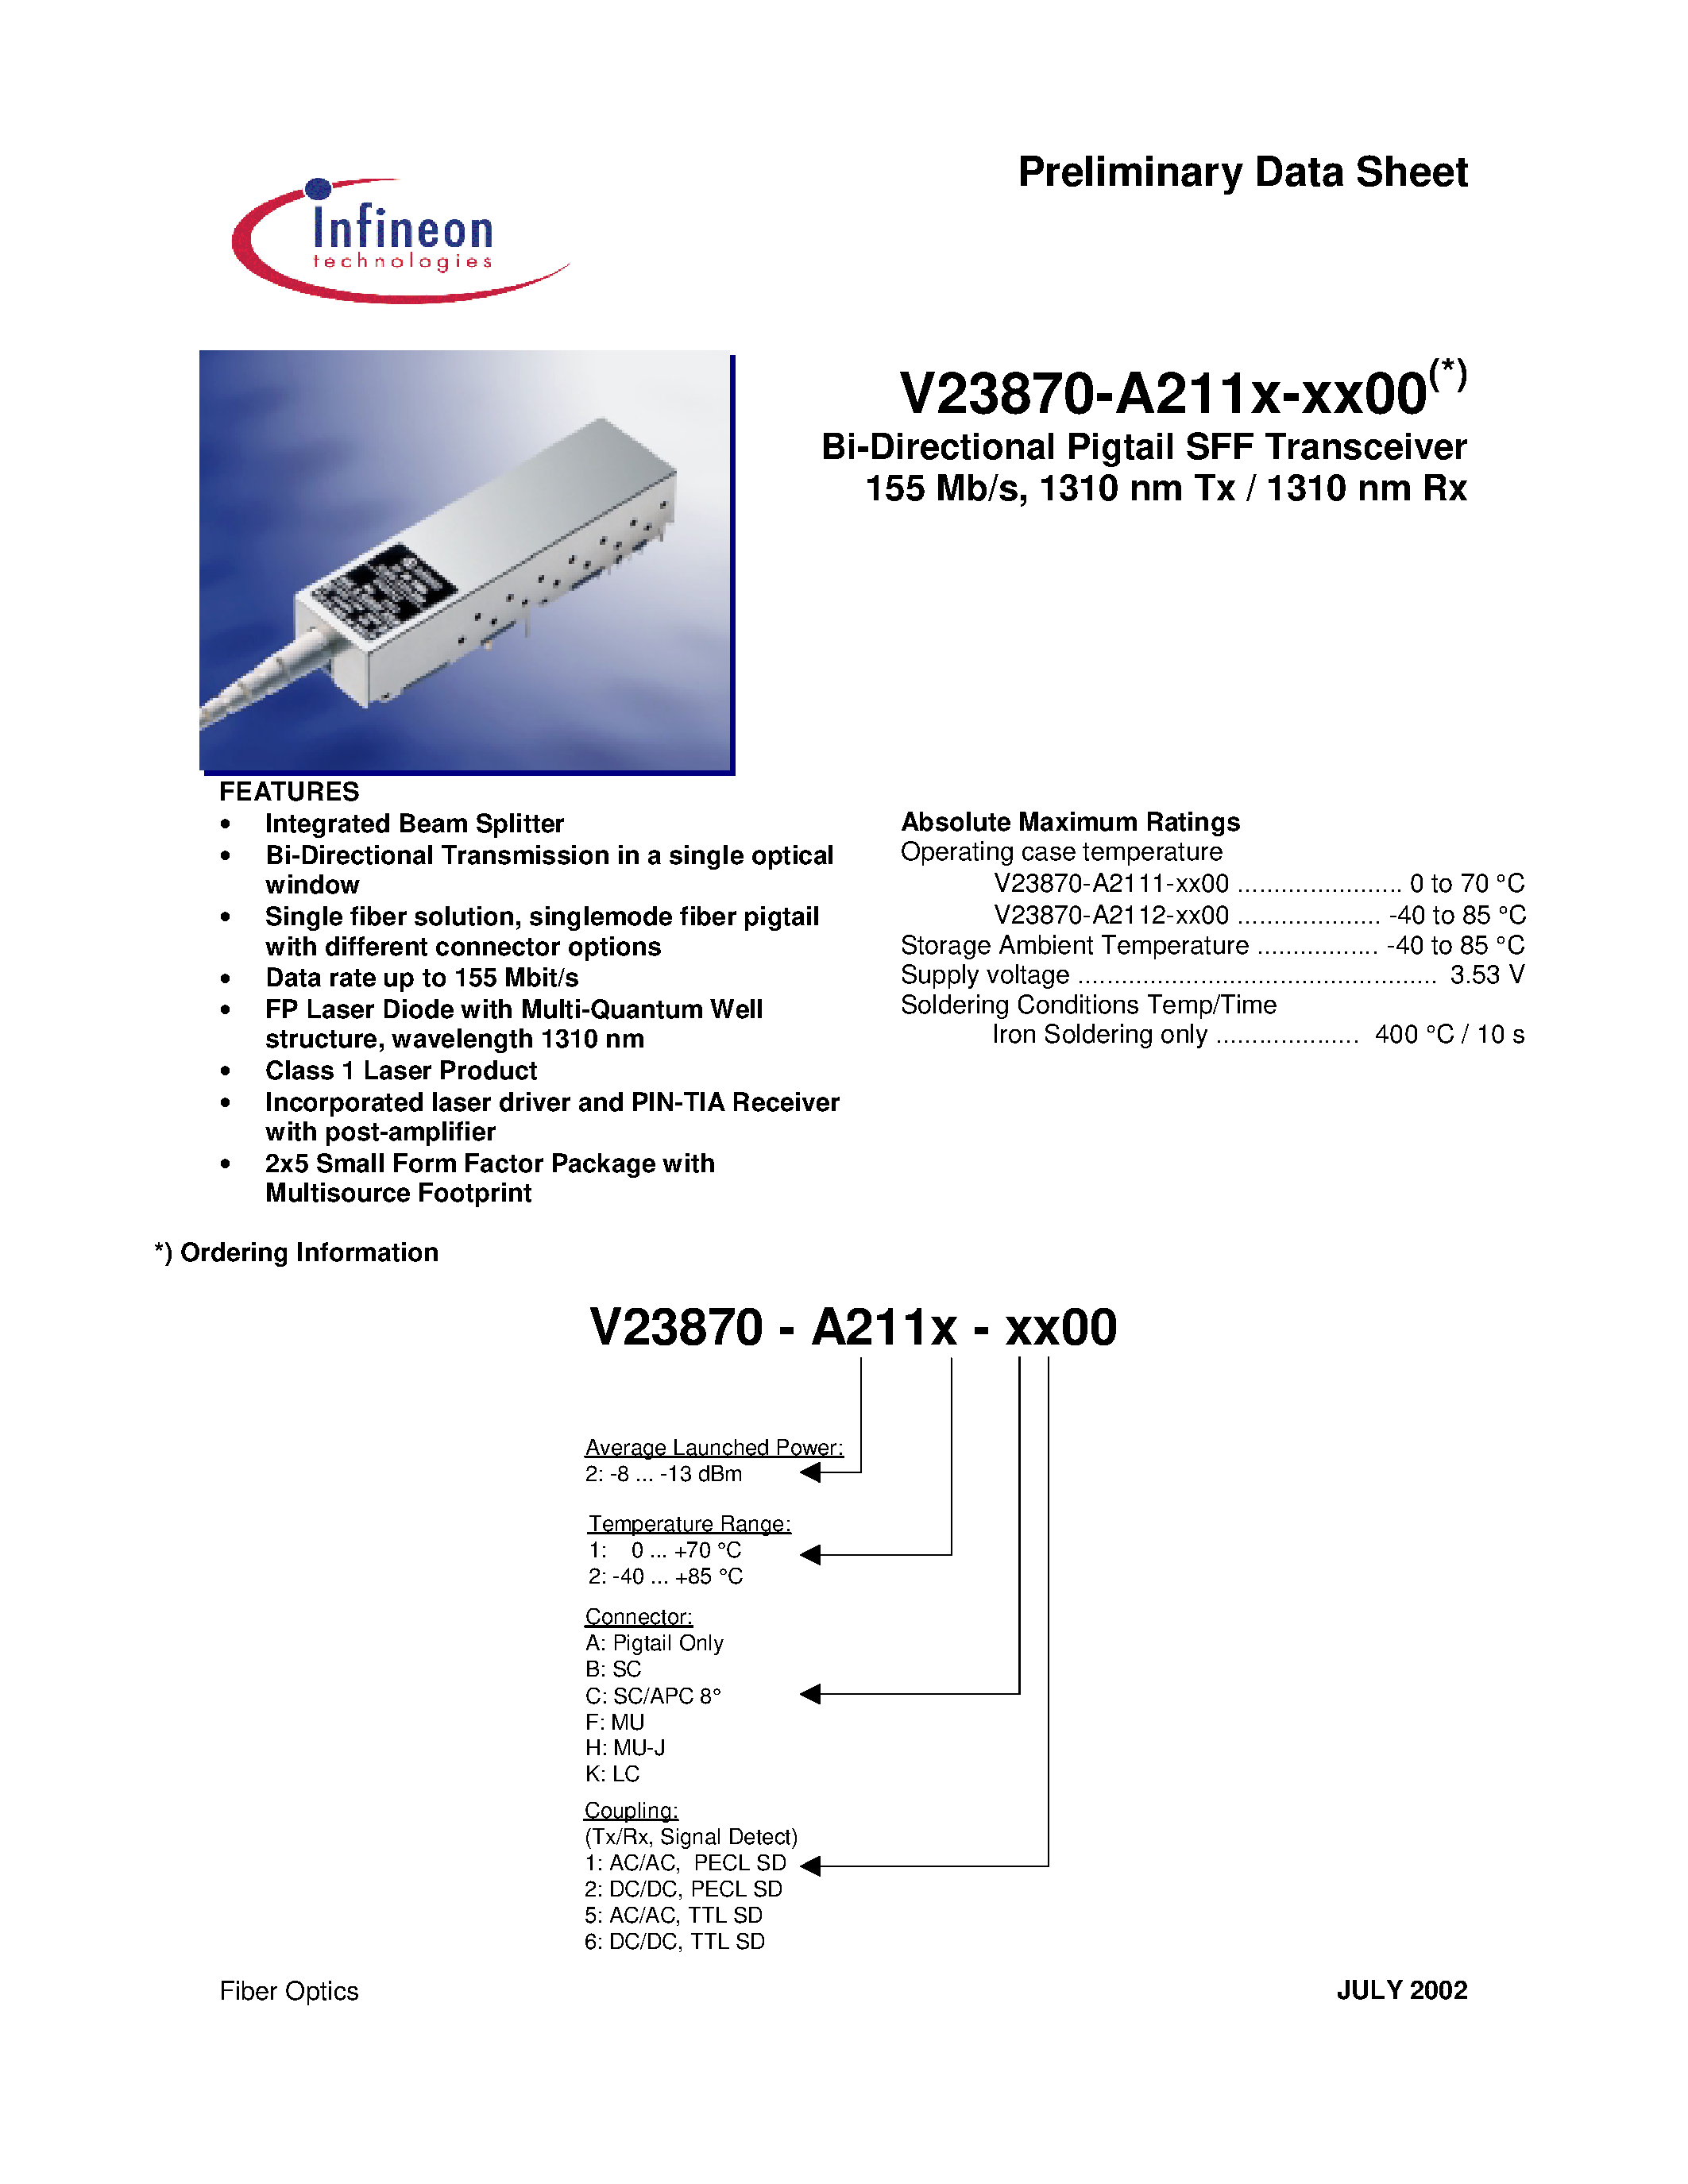 Datasheet V23870-A2112-B100 - Bi-Directional Pigtail SFF Transceiver 155 Mb/s/ 1310 nm Tx / 1310 nm Rx page 1